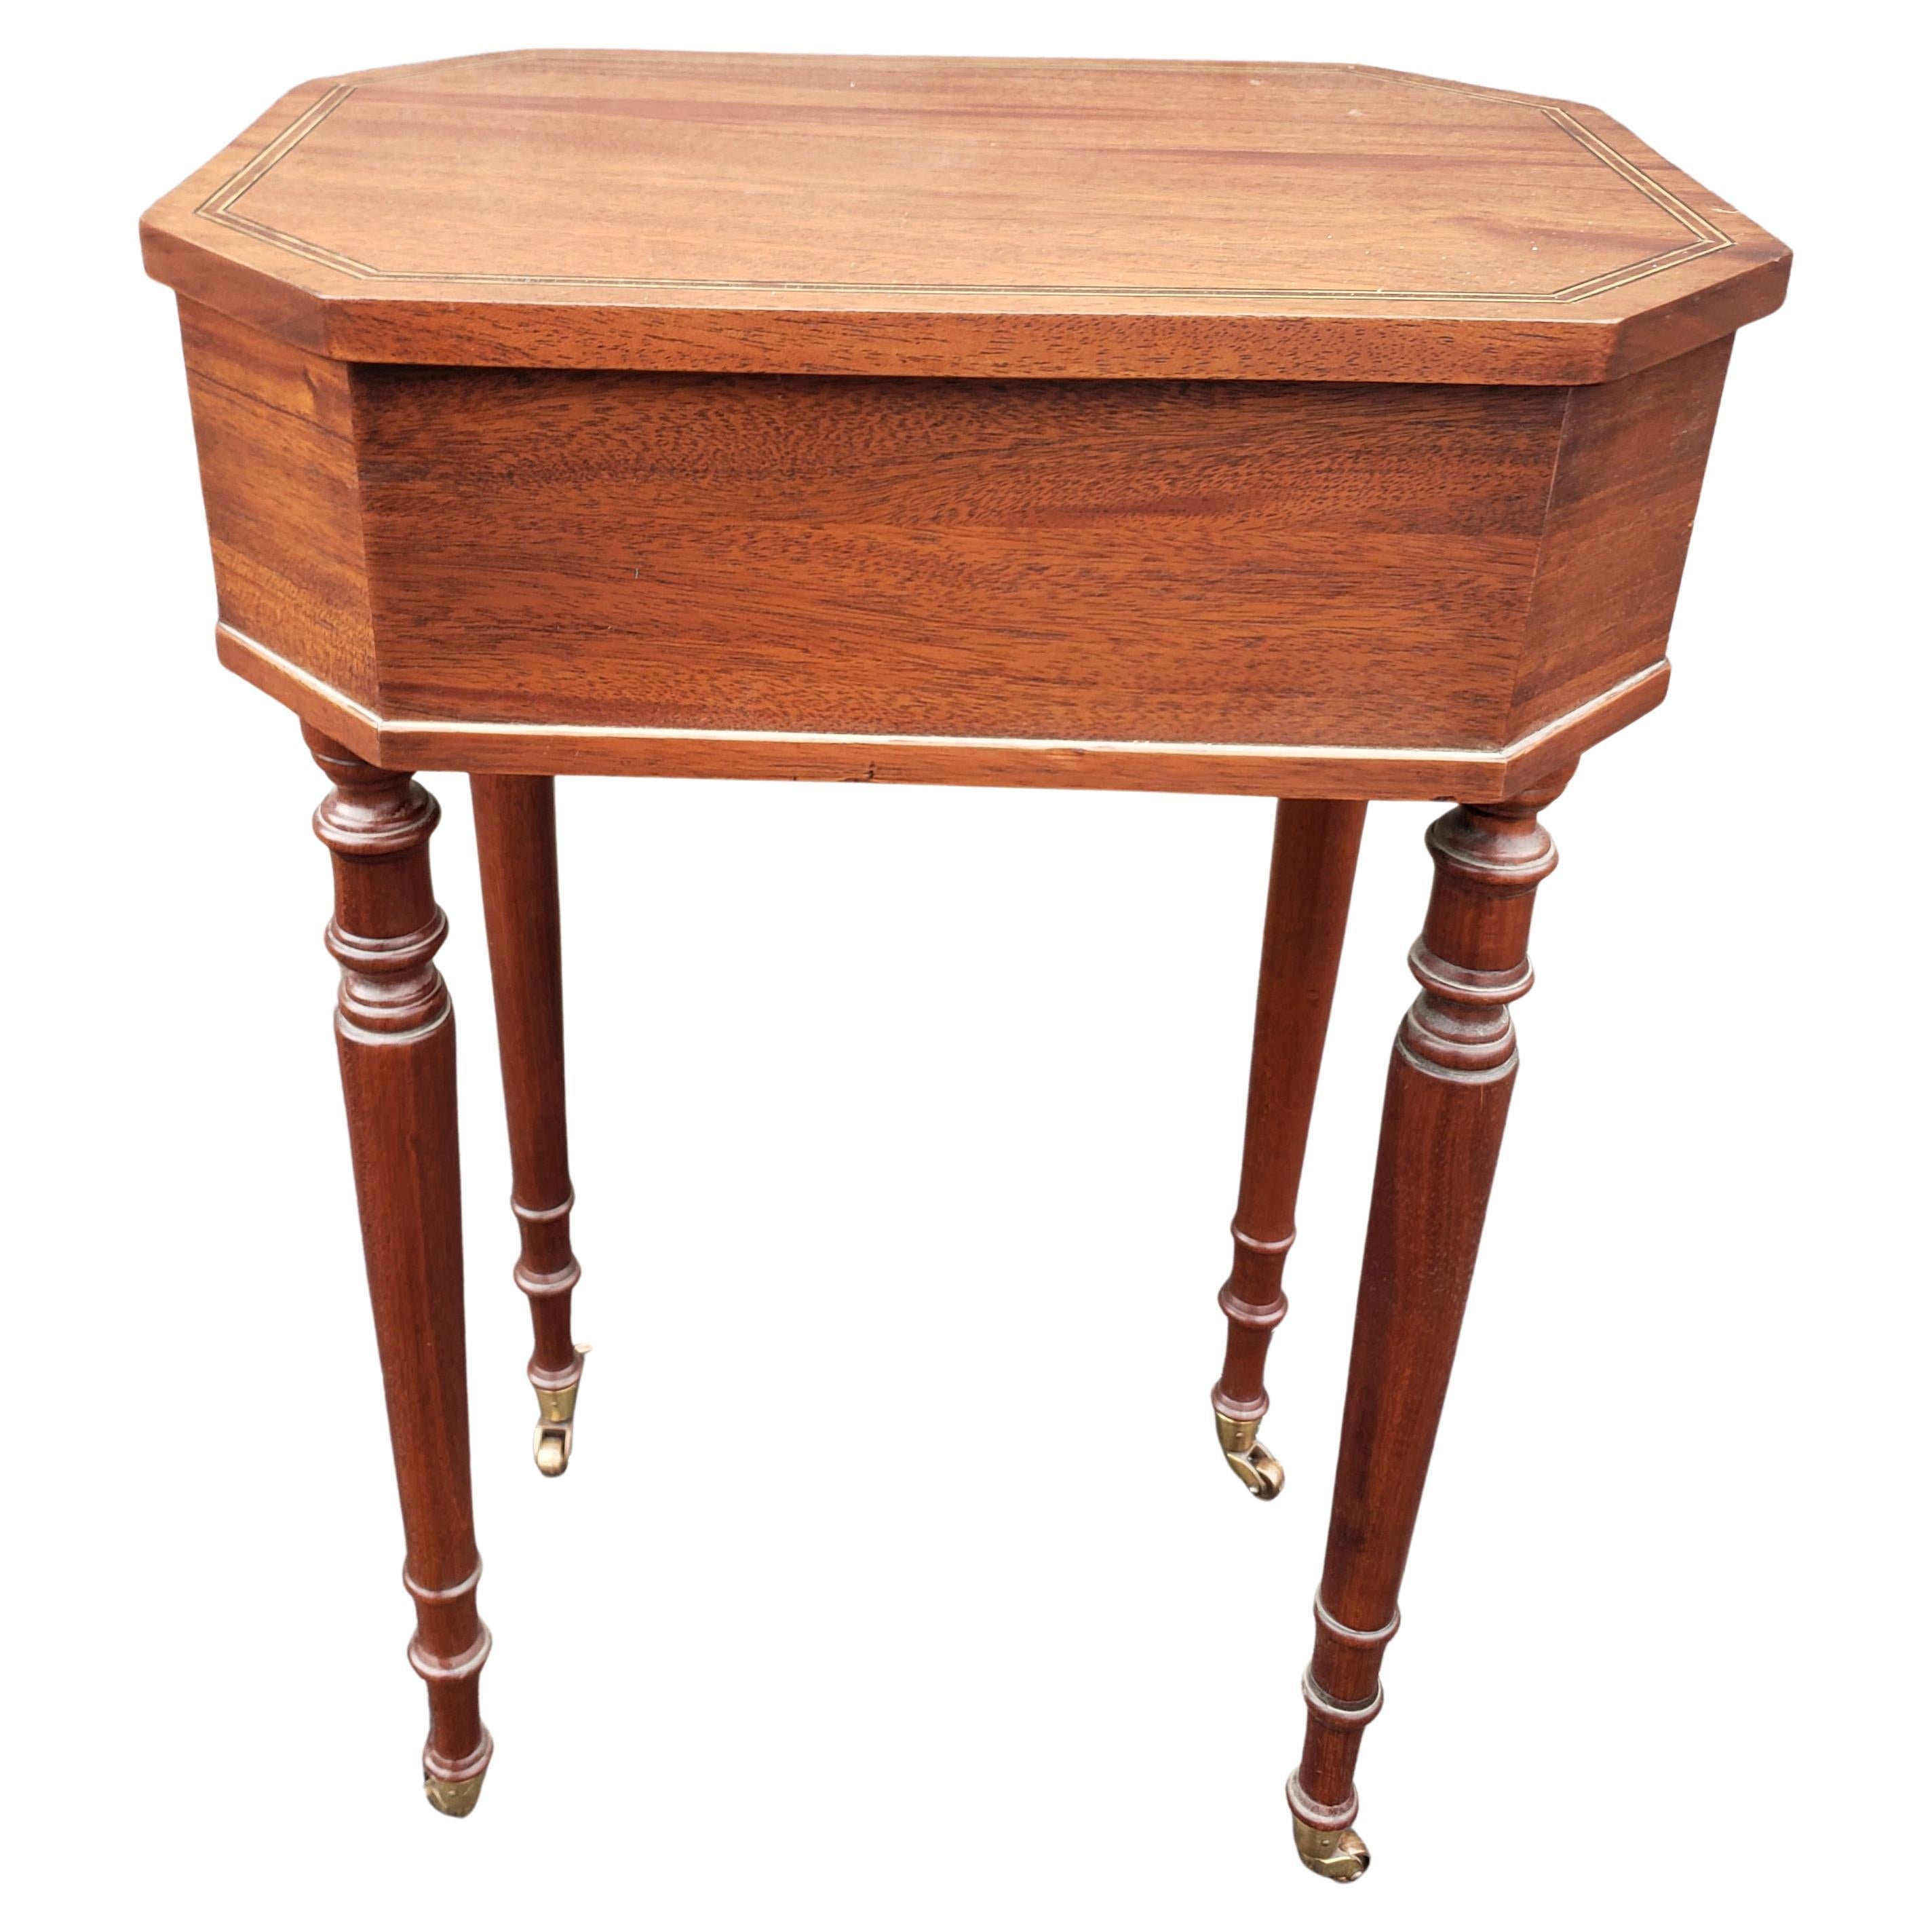  Mahogany Satinwood Banded Inlay Inlay Single Drawer Side Table on Wheels In Good Condition For Sale In Germantown, MD